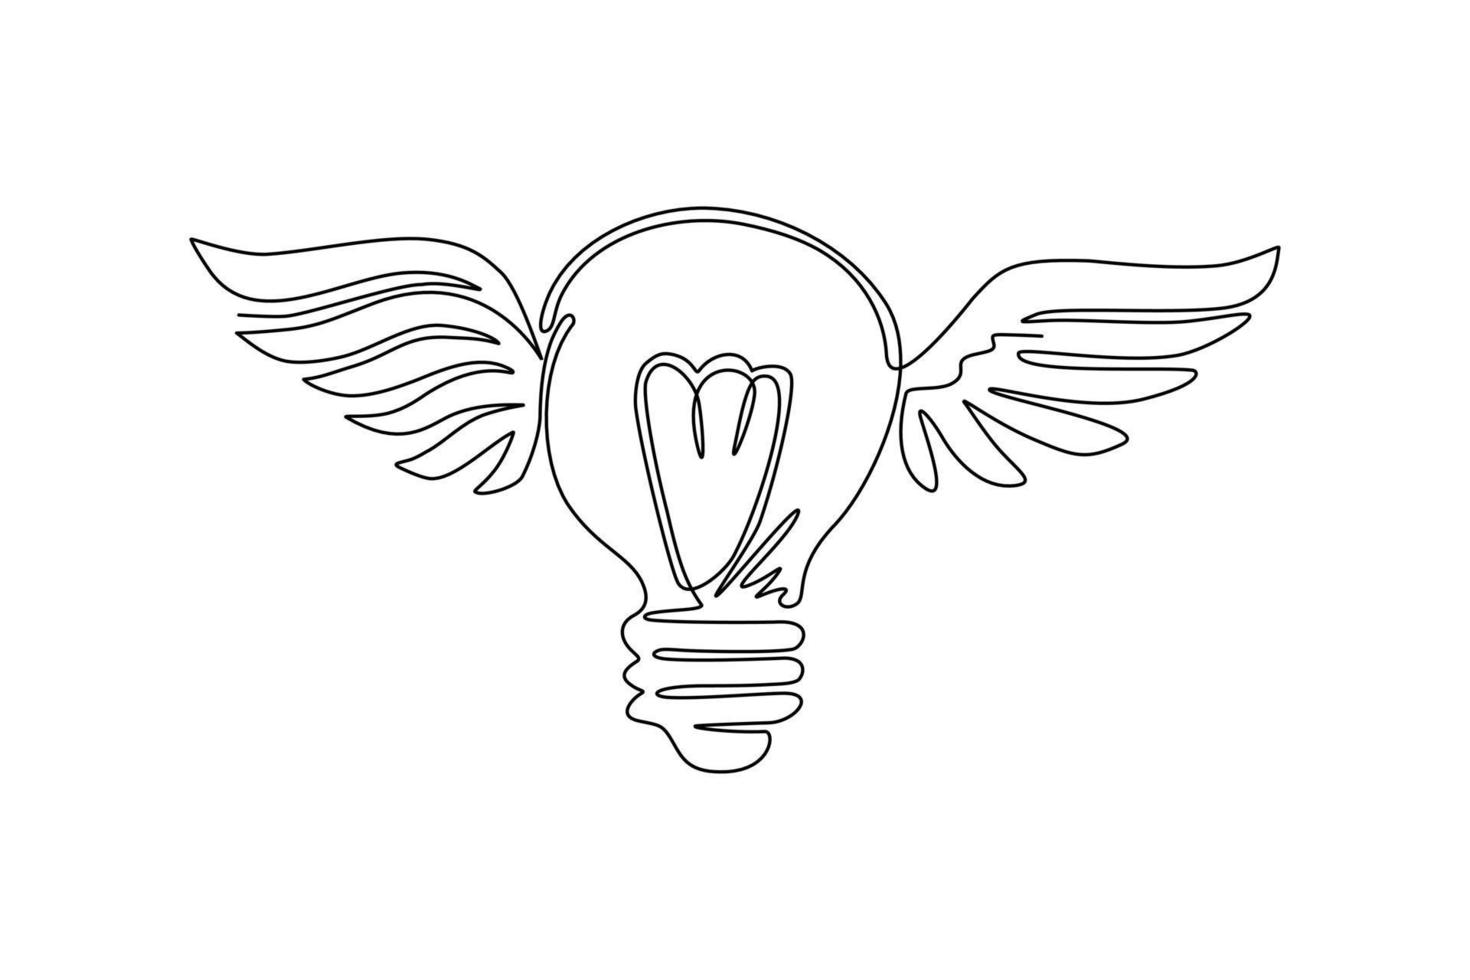 Continuous one line drawing flying bulbs with wings. Flat icon isolated. Imagination, fantasy icon. Knowhow sign. New business idea. Invention logo. Single line draw design vector graphic illustration